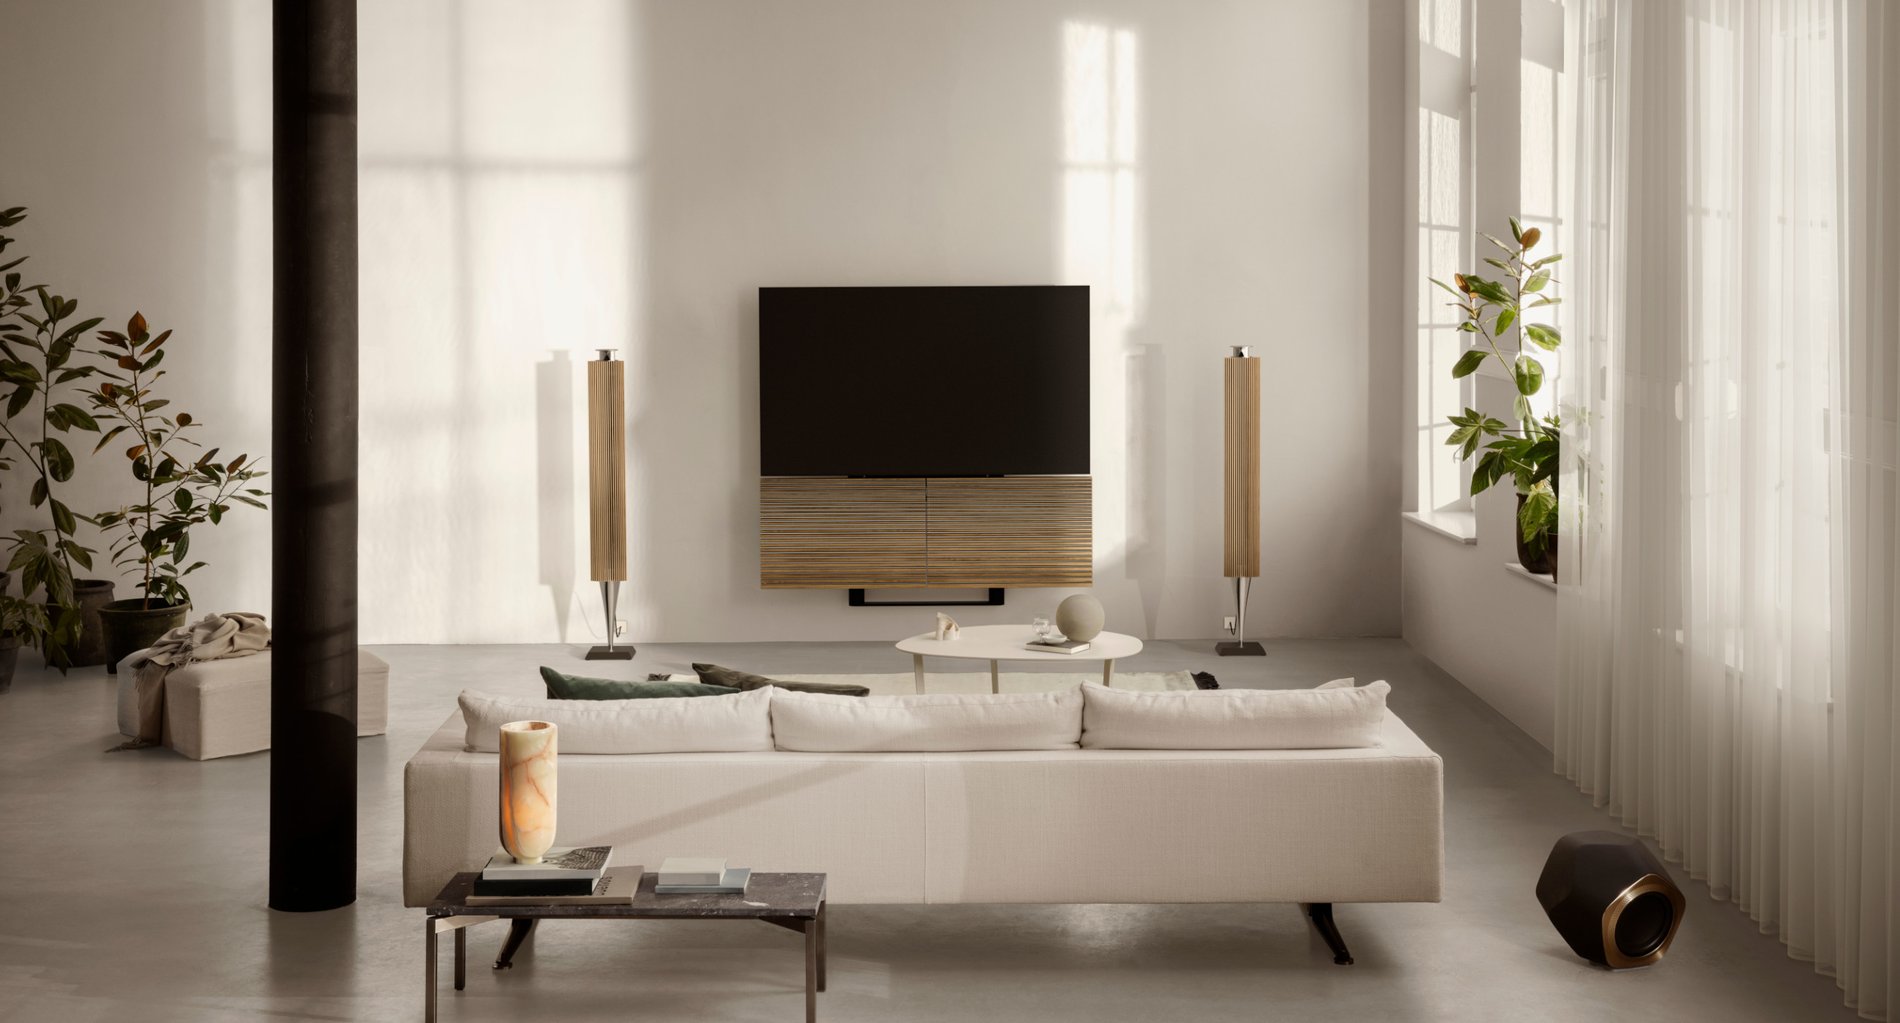 Powerful soundbar that brings Bang & Olufsen sound to your own TV without the need of a subwoofer.